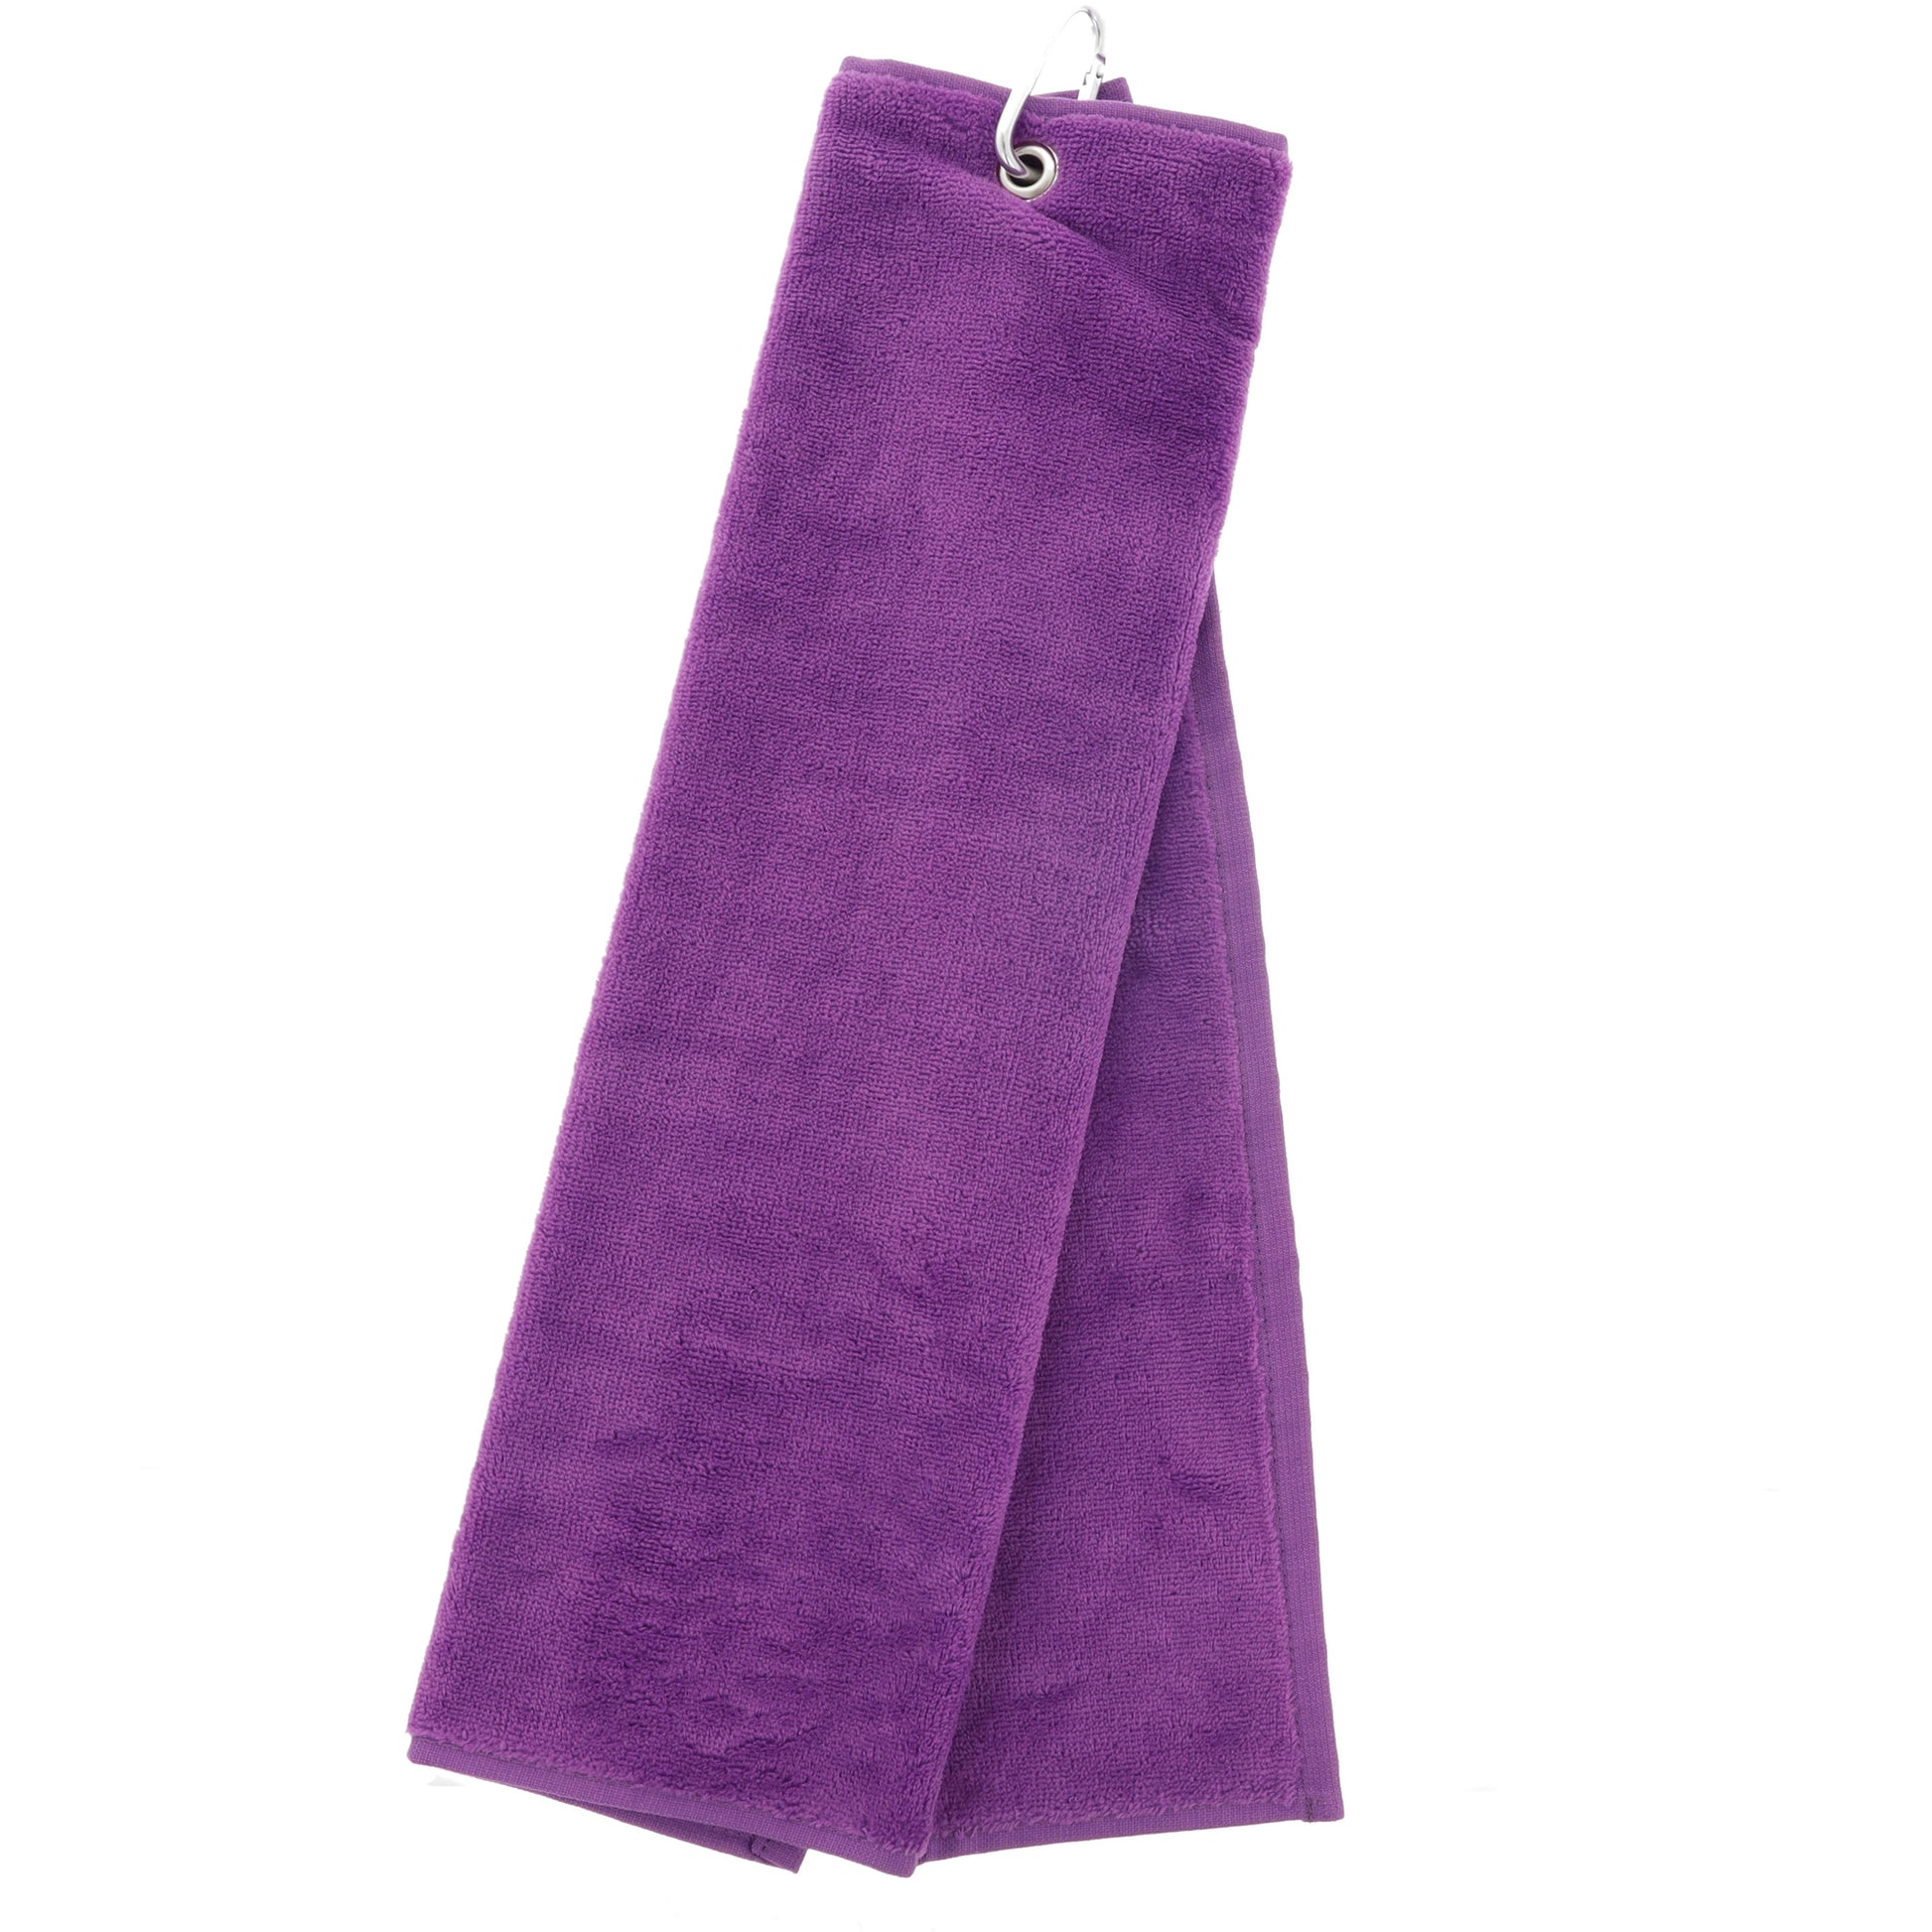 Personalised Embroidered Tri Fold GOLF Towel Trifold Towel with Carabiner Clip  - Always Looking Good - Purple  